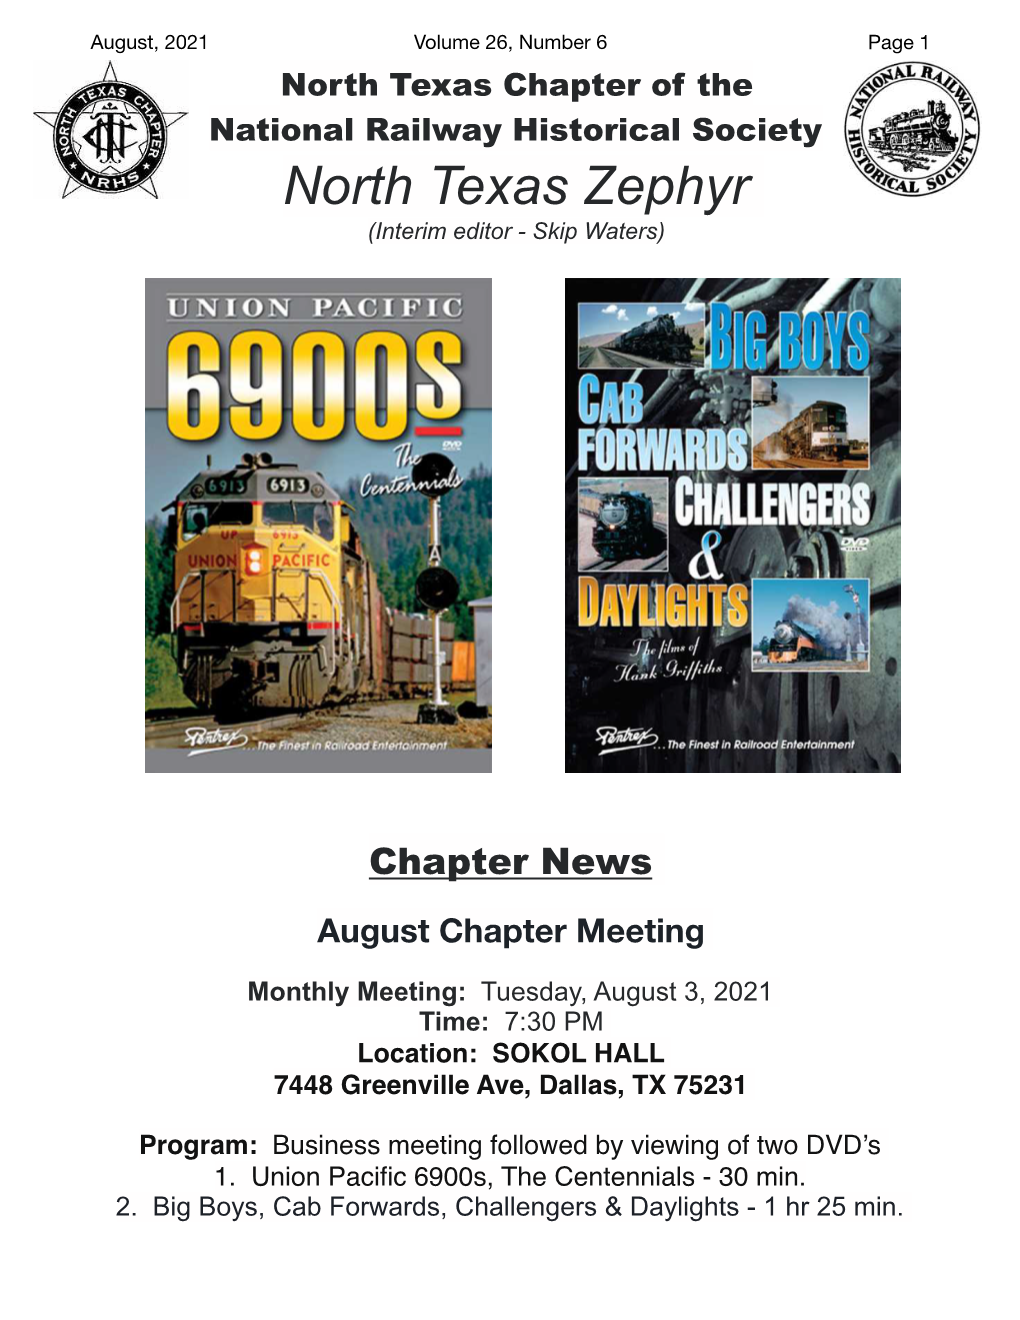 The Zephyr – August 2021, Volume 26, Issue 6